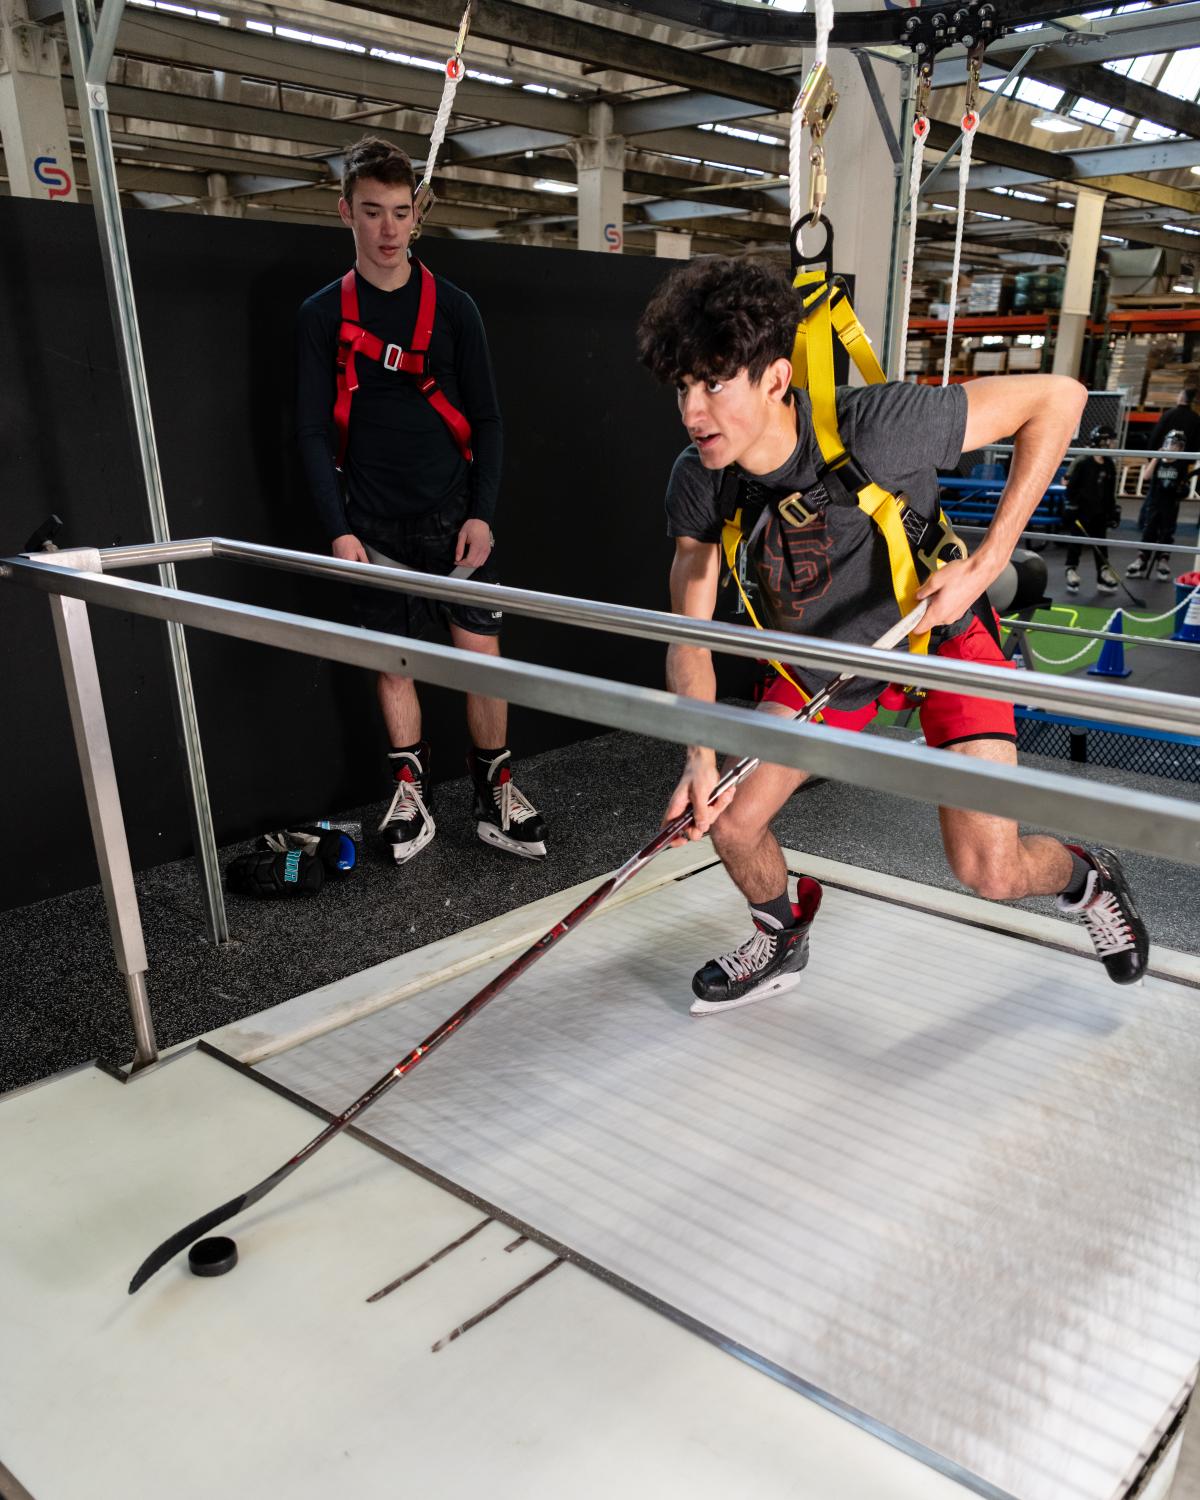 How the skating treadmill changed hockey practice forever